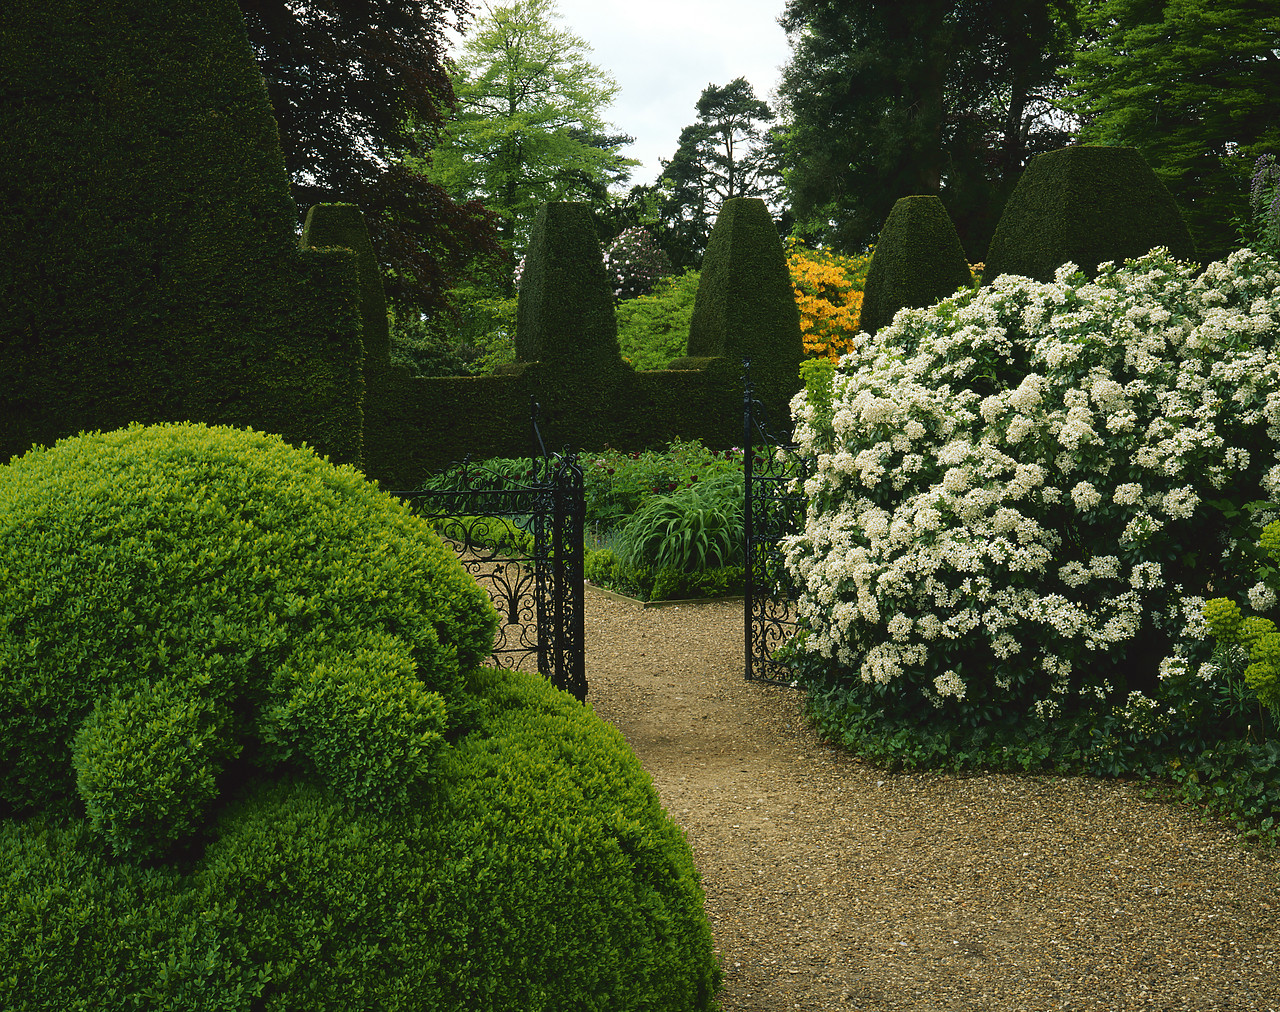 #200559-3 - Topiary Hedges, Nymans Gardens, West Sussex, England